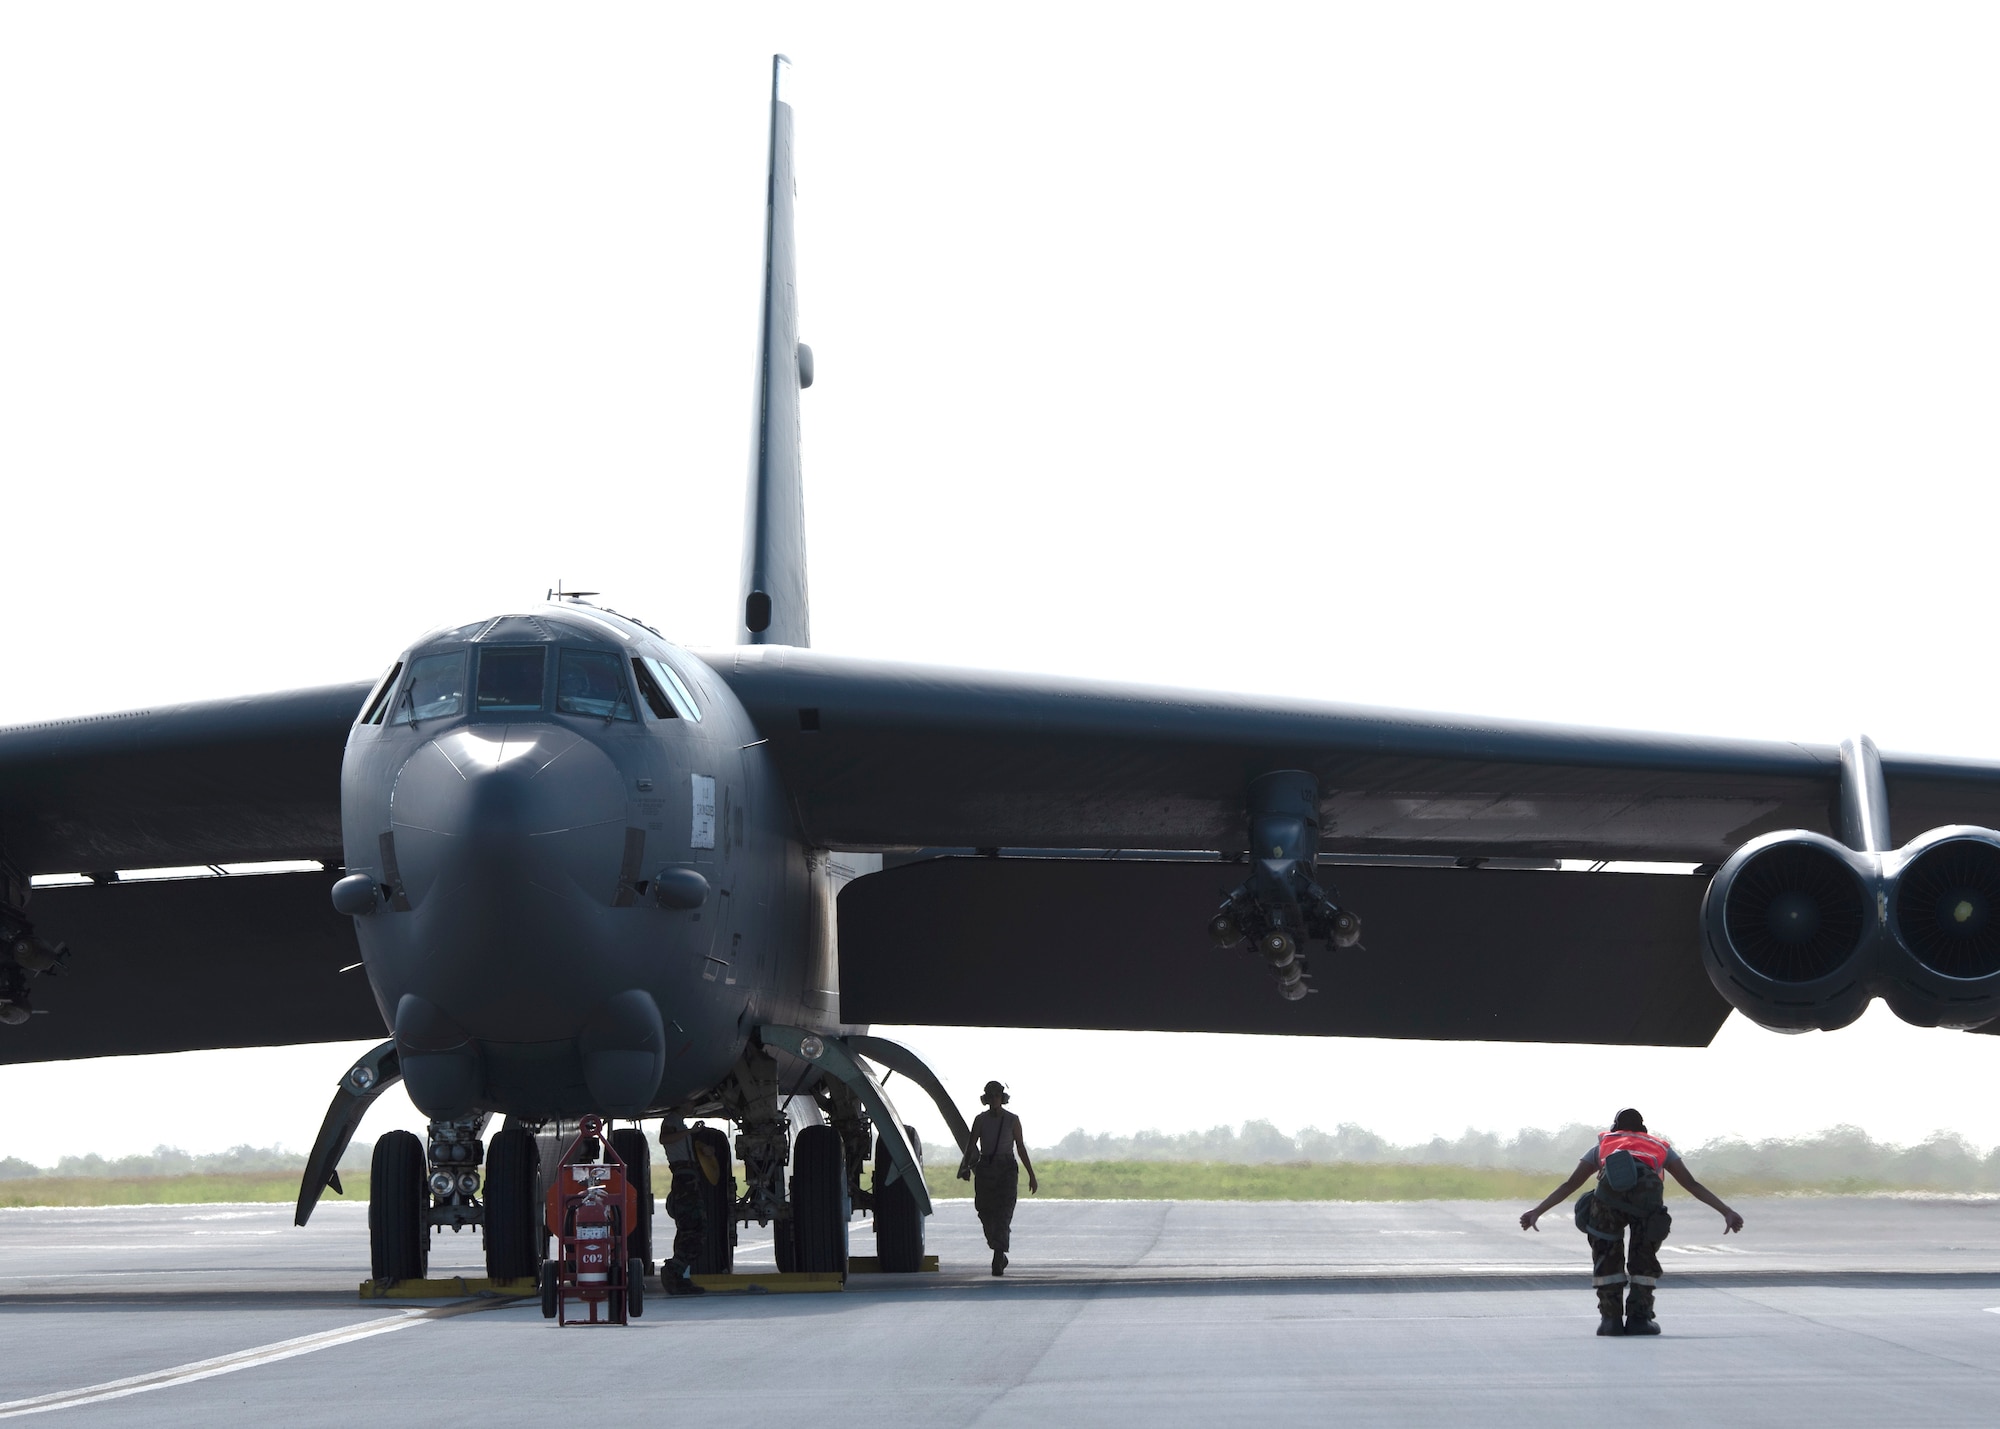 A B-52 Stratofortress with the 69th Expeditionary Bomb Squadron sits on the flightline at Andersen Air Force Base, Guam, Nov. 19, 2019. B-52s have held a vital role in supporting the Continuous Bomber Presence mission in the Indo-Pacific region since 2004.  (U.S. Air force photo by Staff Sgt. Kevin Iinuma)